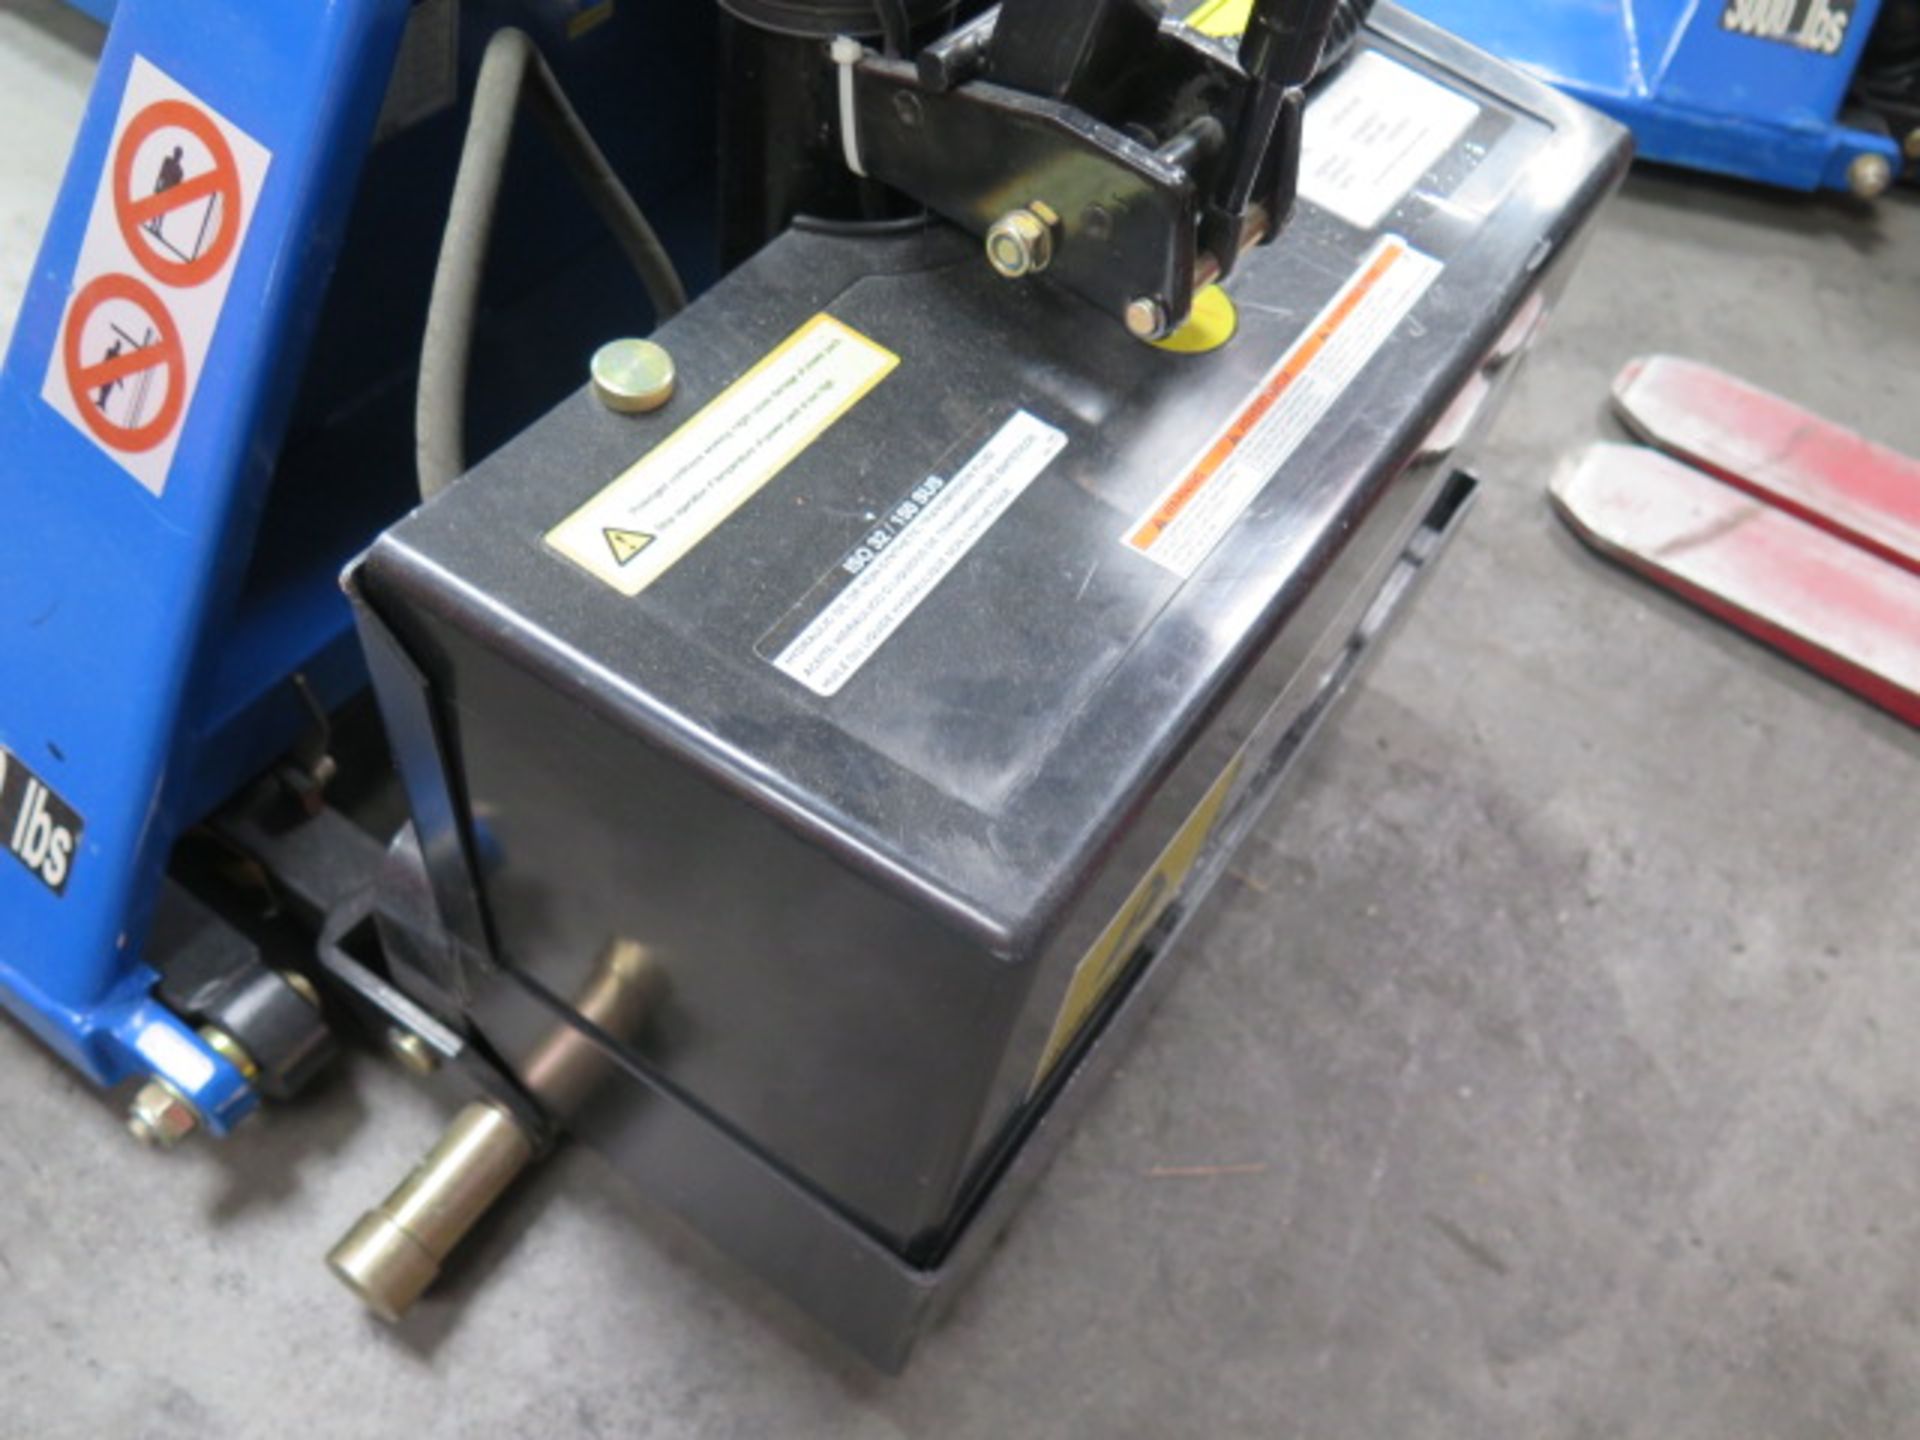 2015 Import mdl L-270-DC-HD 3000 Lb Cap Electric Pallet Jack w/ Built-In Charger, SOLD AS IS - Image 8 of 11